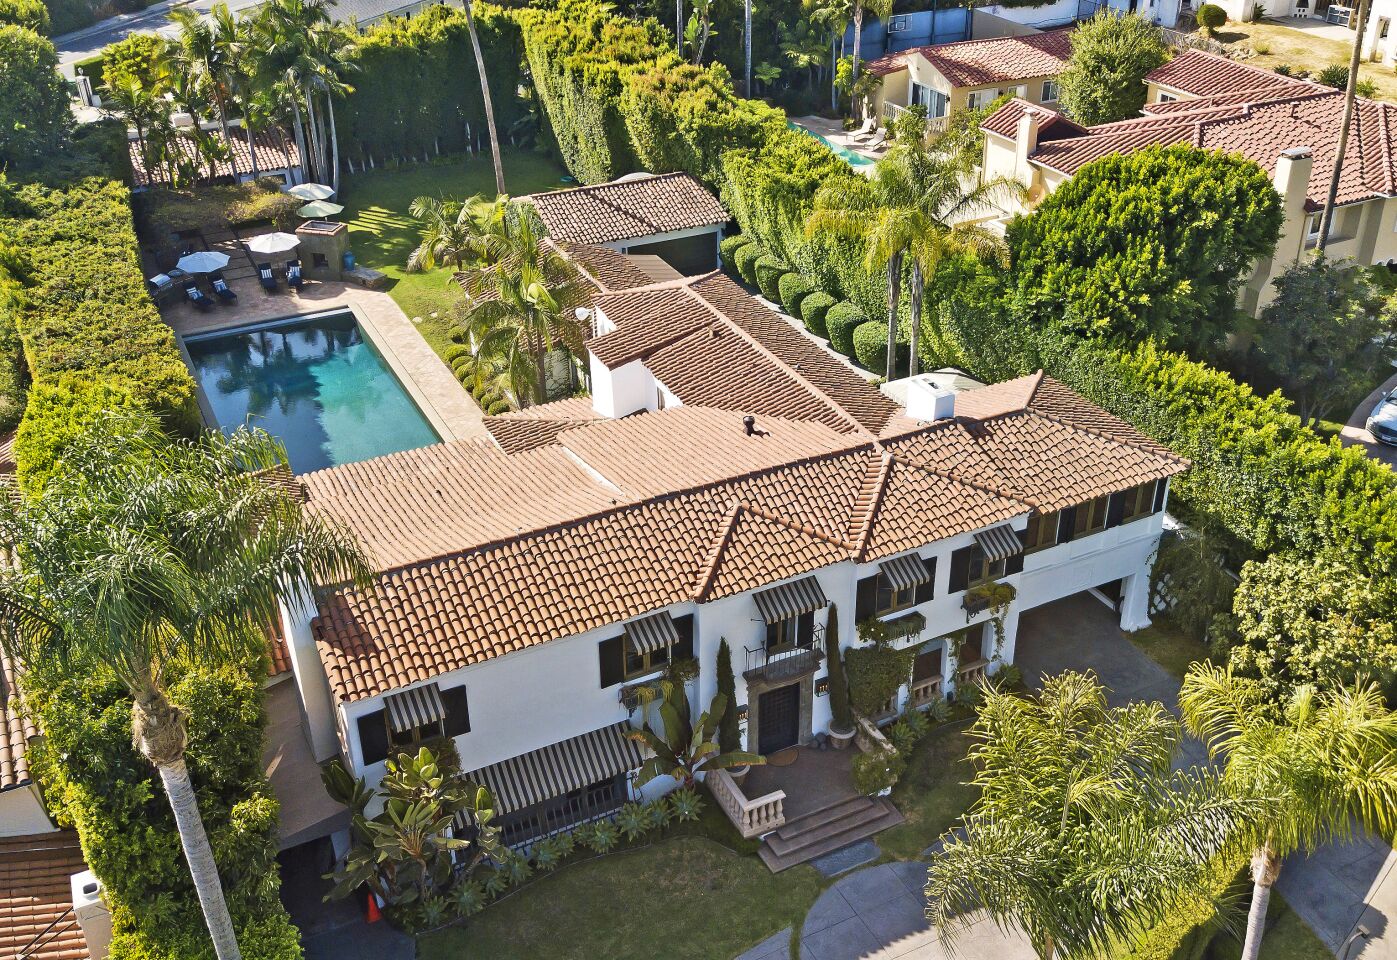 William Powell's onetime estate in Beverly Hills